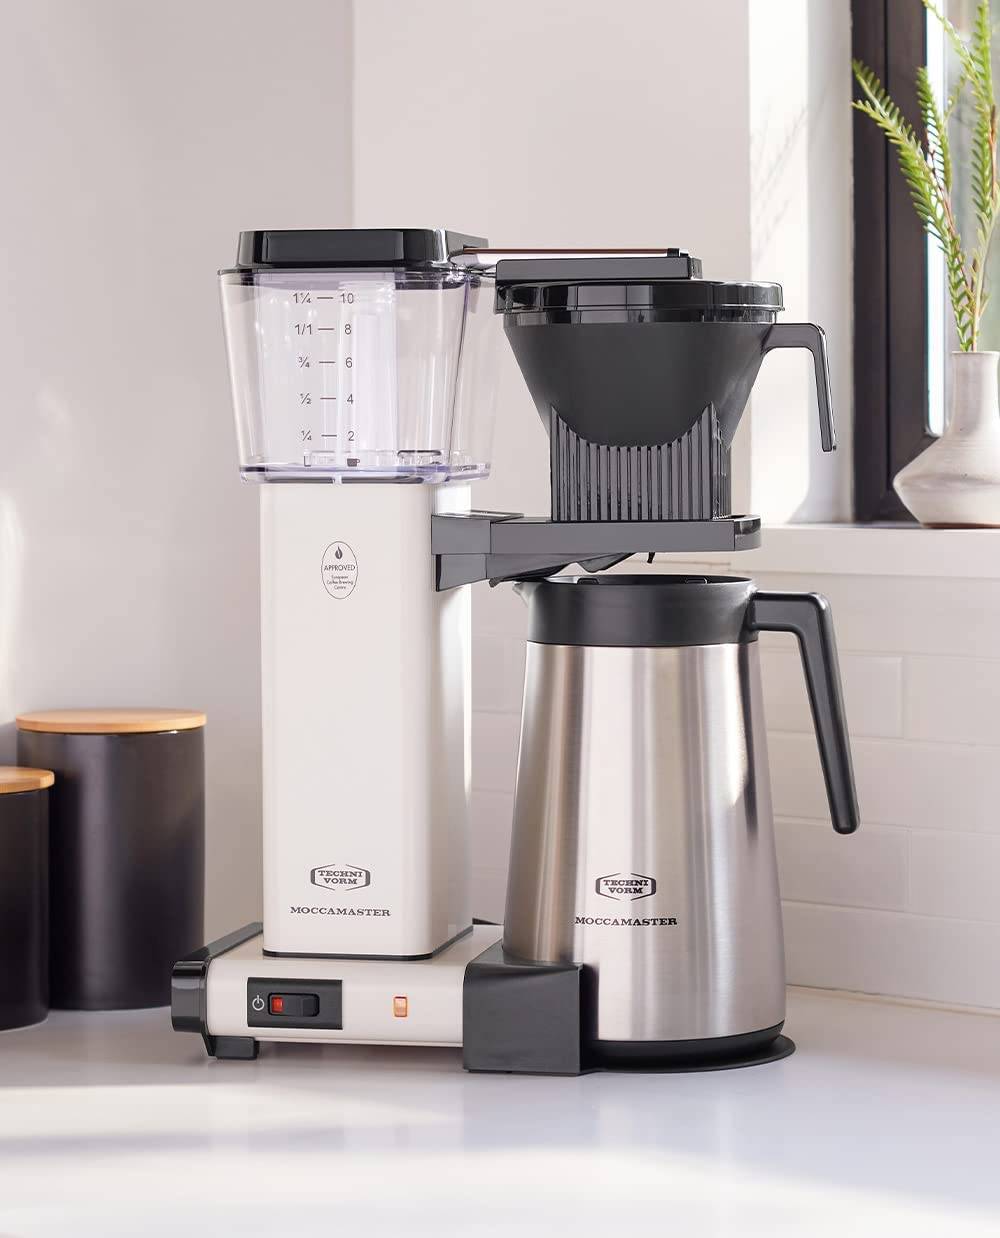 Moccamaster Glass KBGV Select Off White Coffeemaker by Technivorm